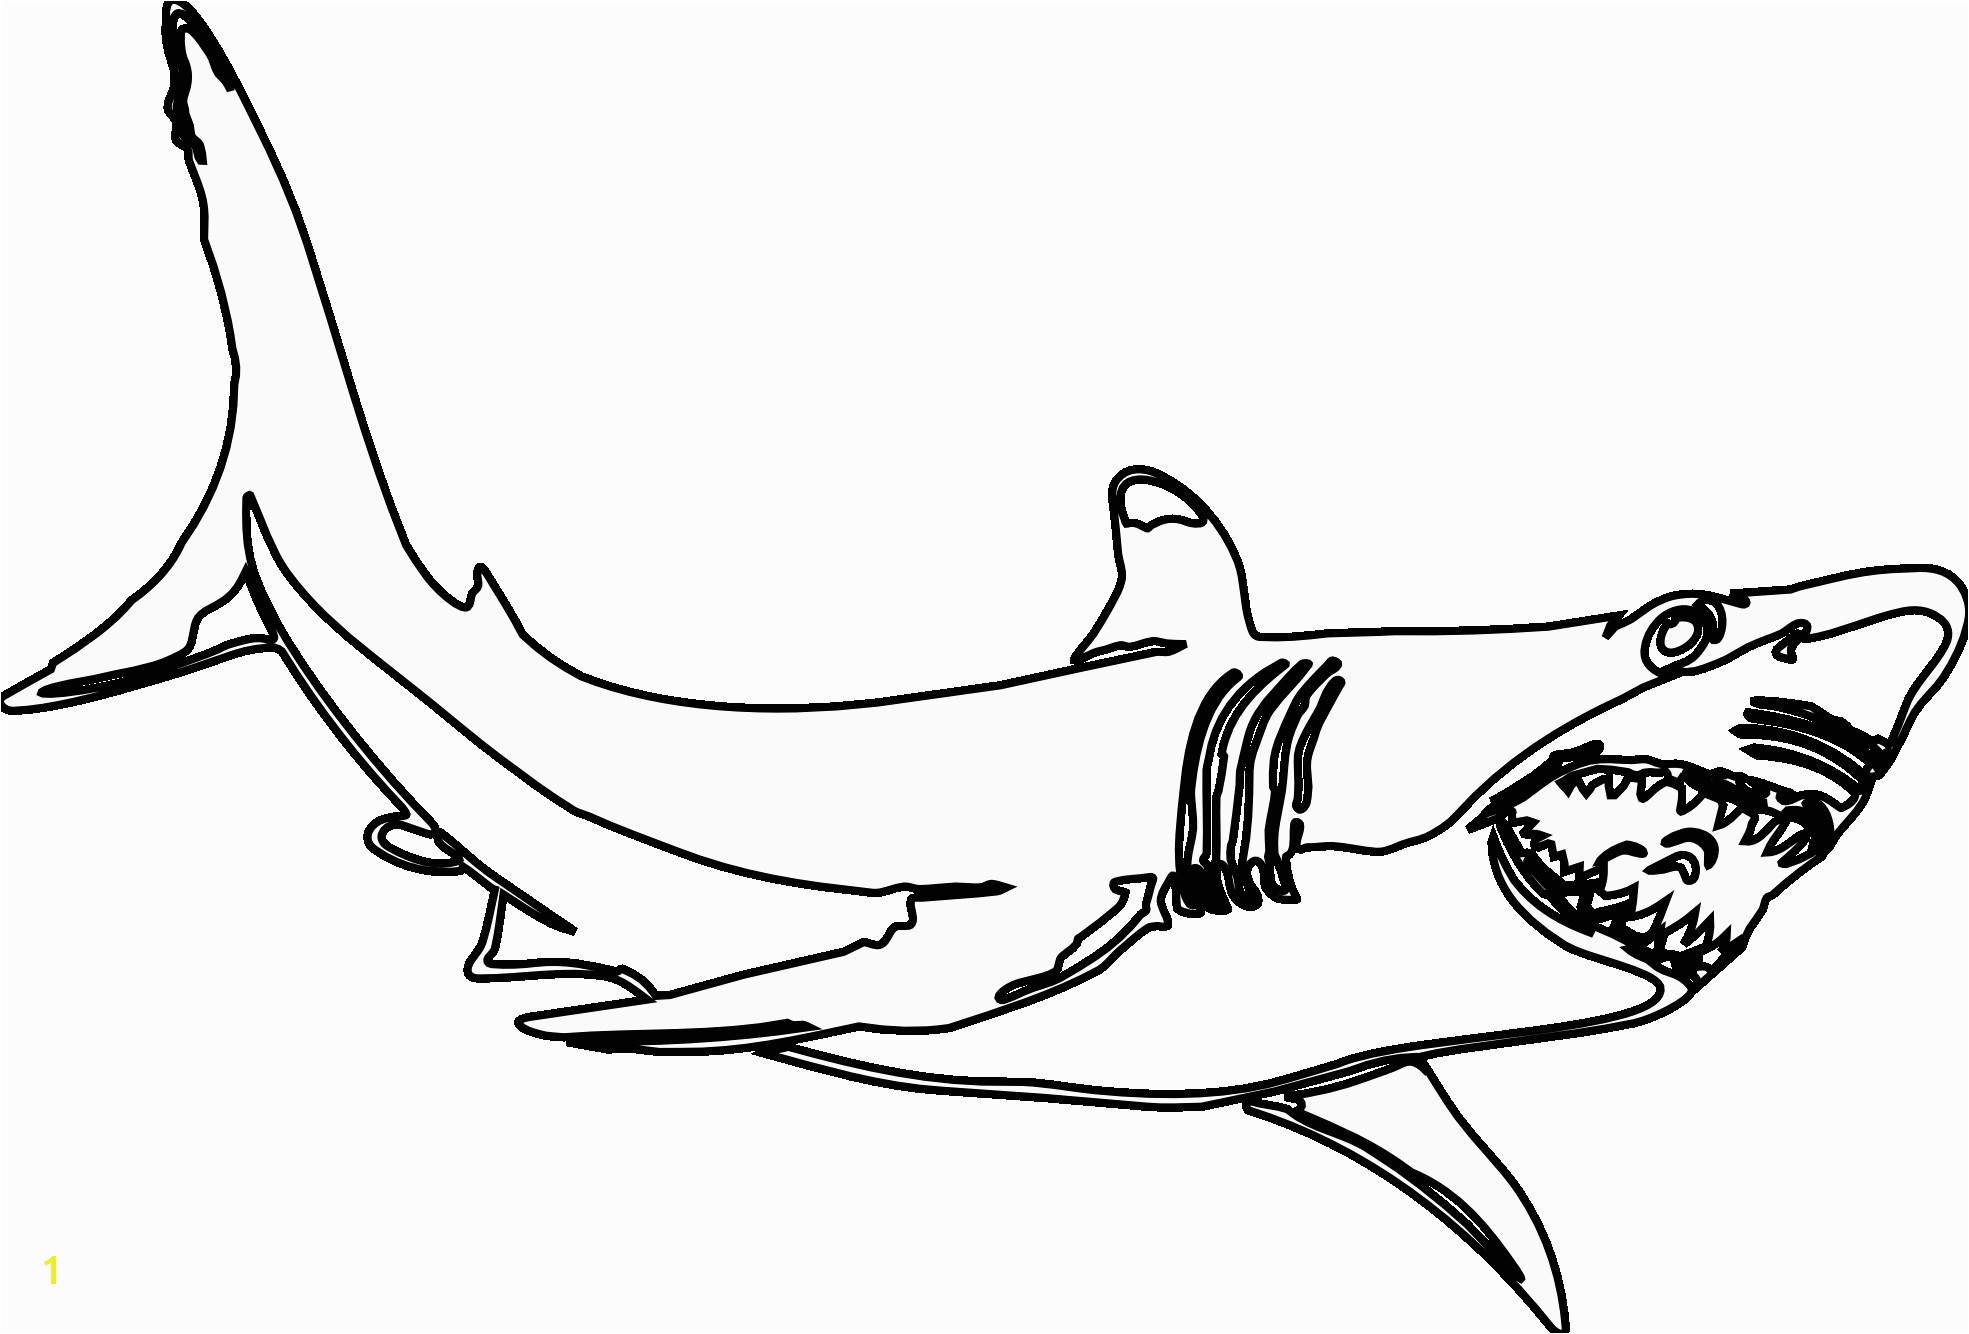 Shark Teeth Coloring Pages Free Shark Coloring Pages